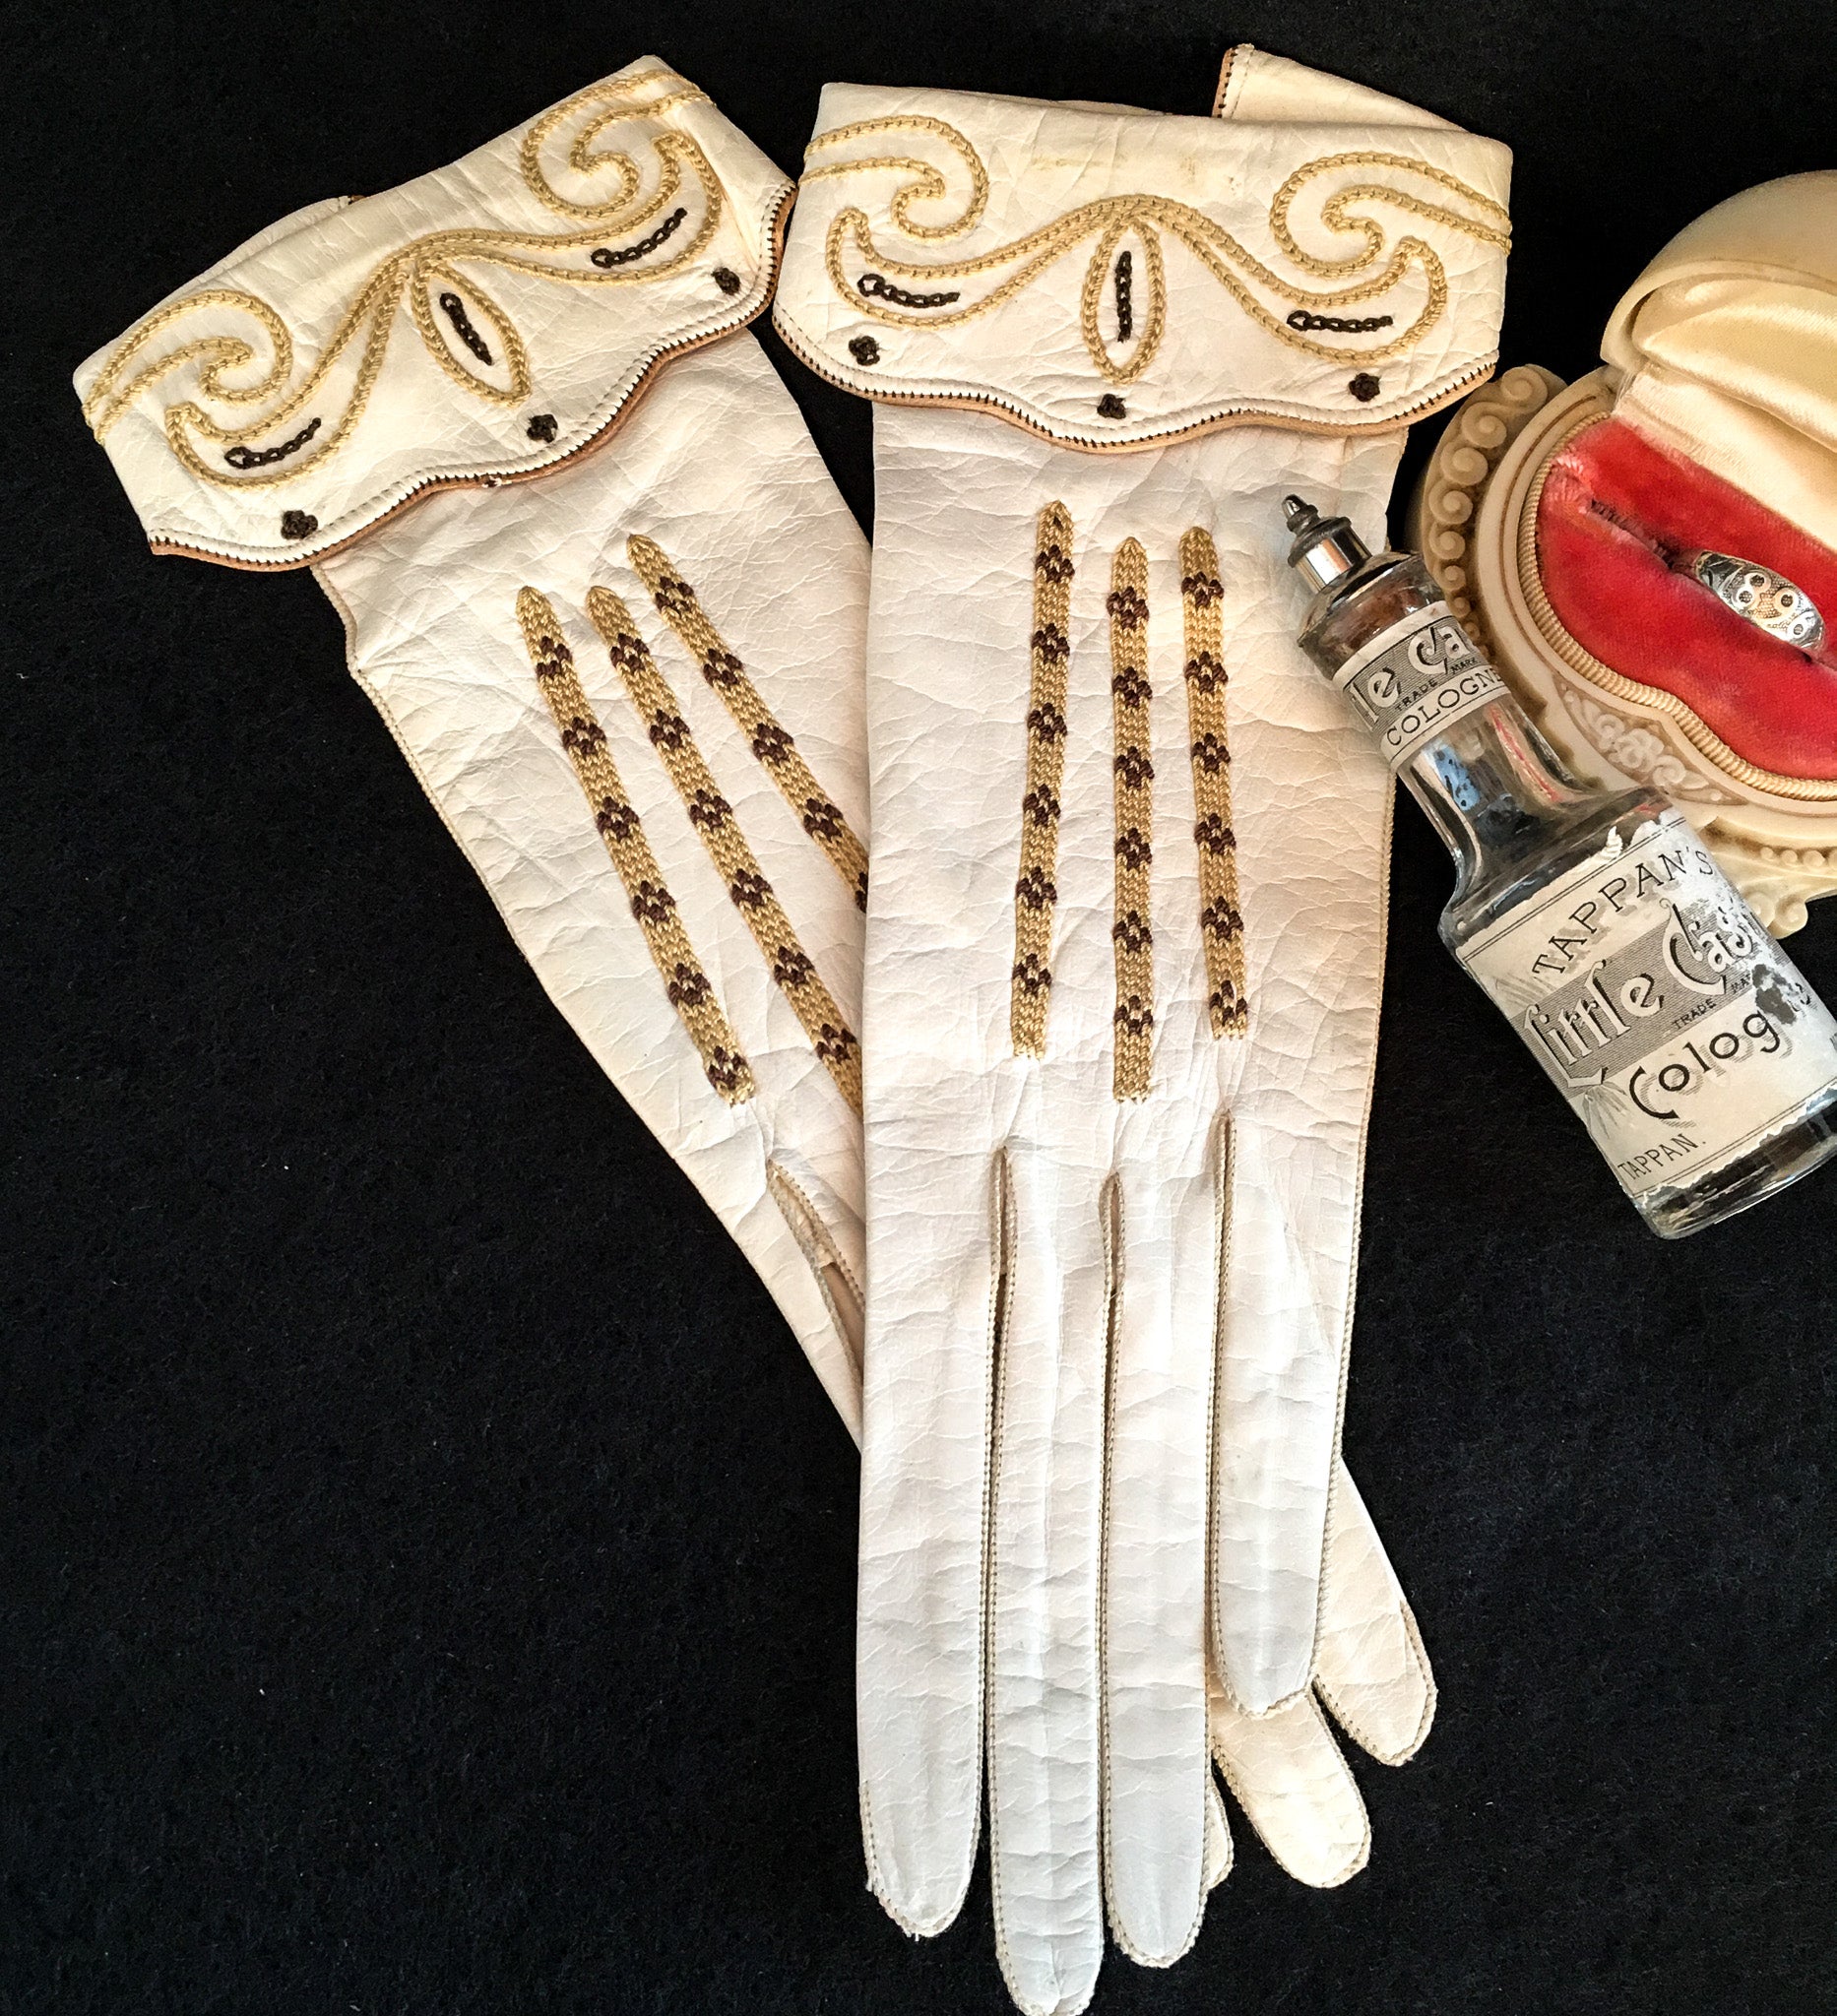 Early 1900’s Embroidered Leather Gloves, “Aris” Size 5 ¾